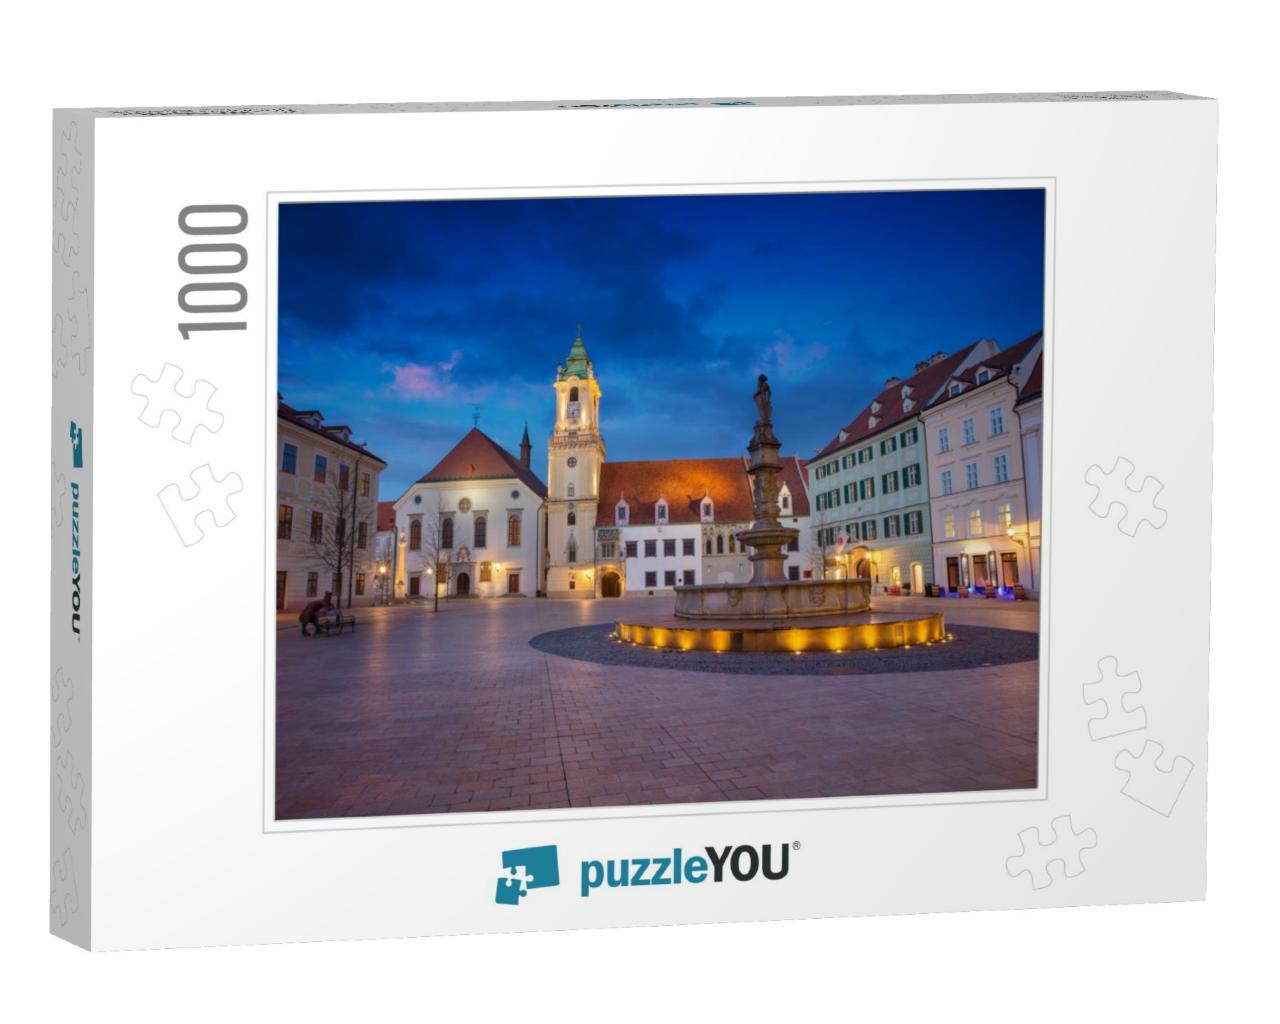 Bratislava. Cityscape Image of the Main Square & Old Town... Jigsaw Puzzle with 1000 pieces